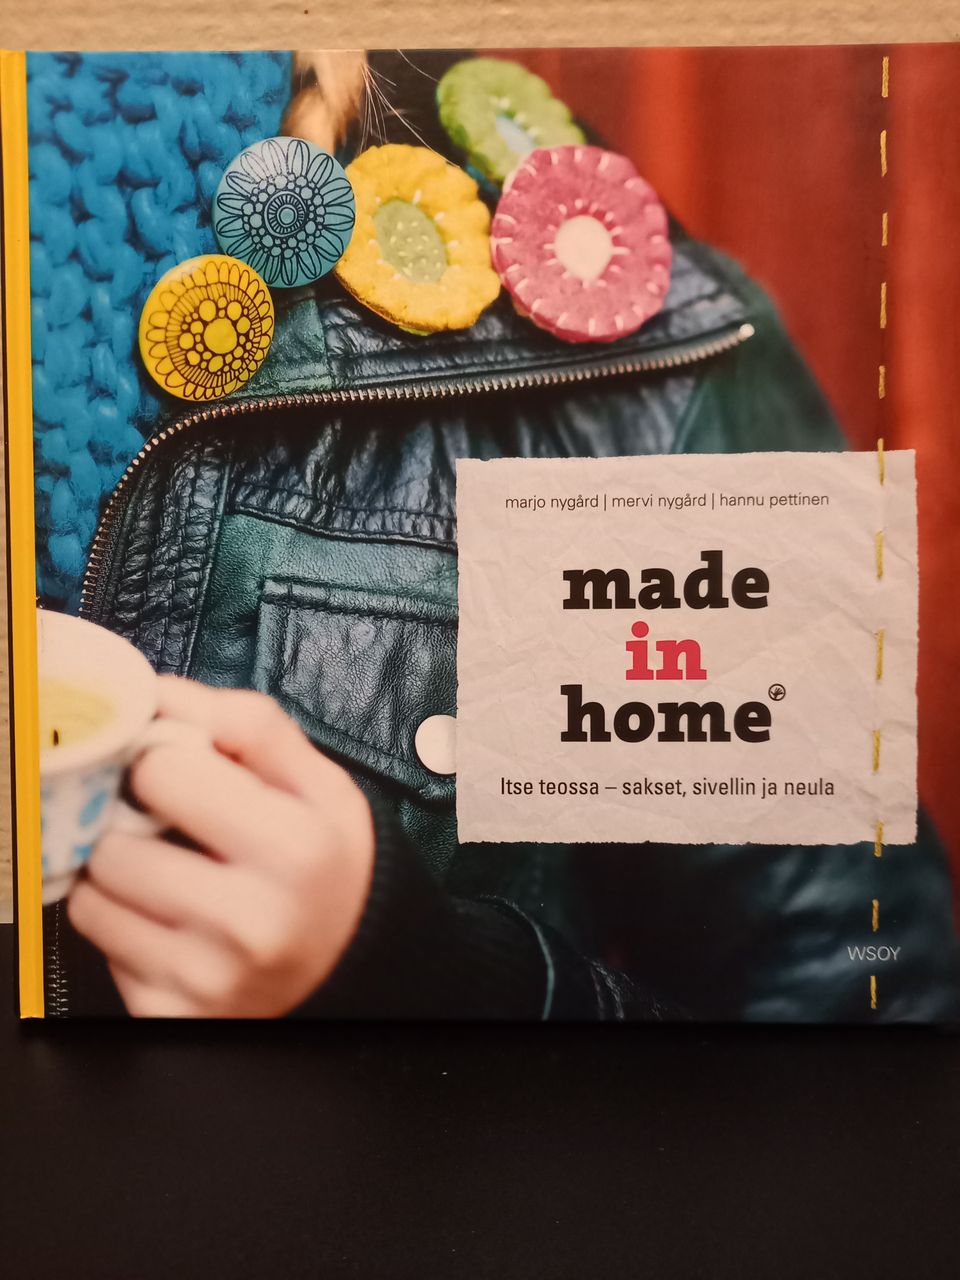 Made in home